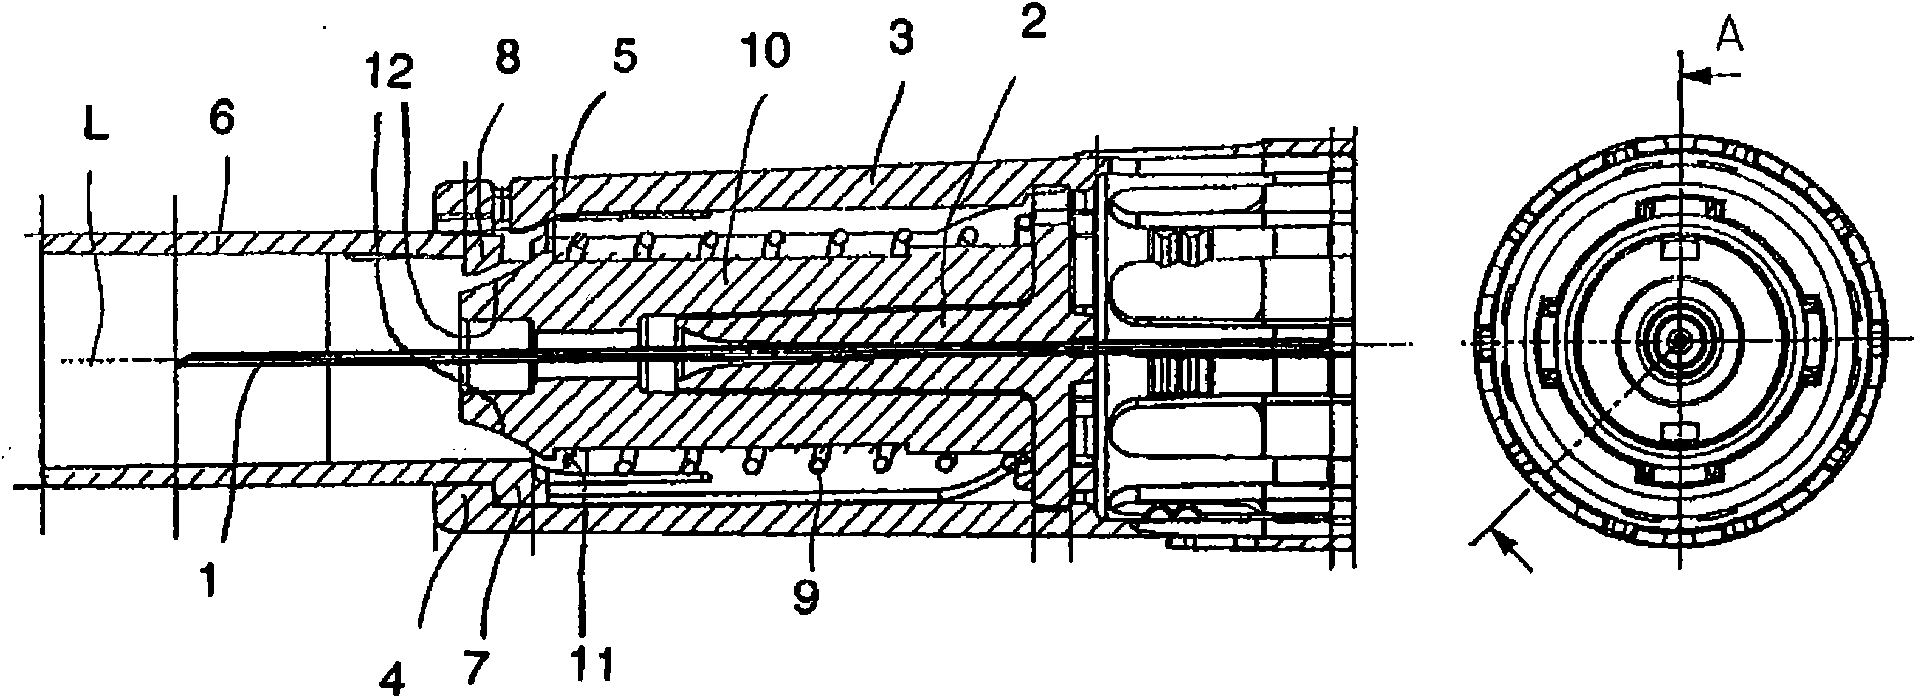 Needle protection device with a blocked protection position